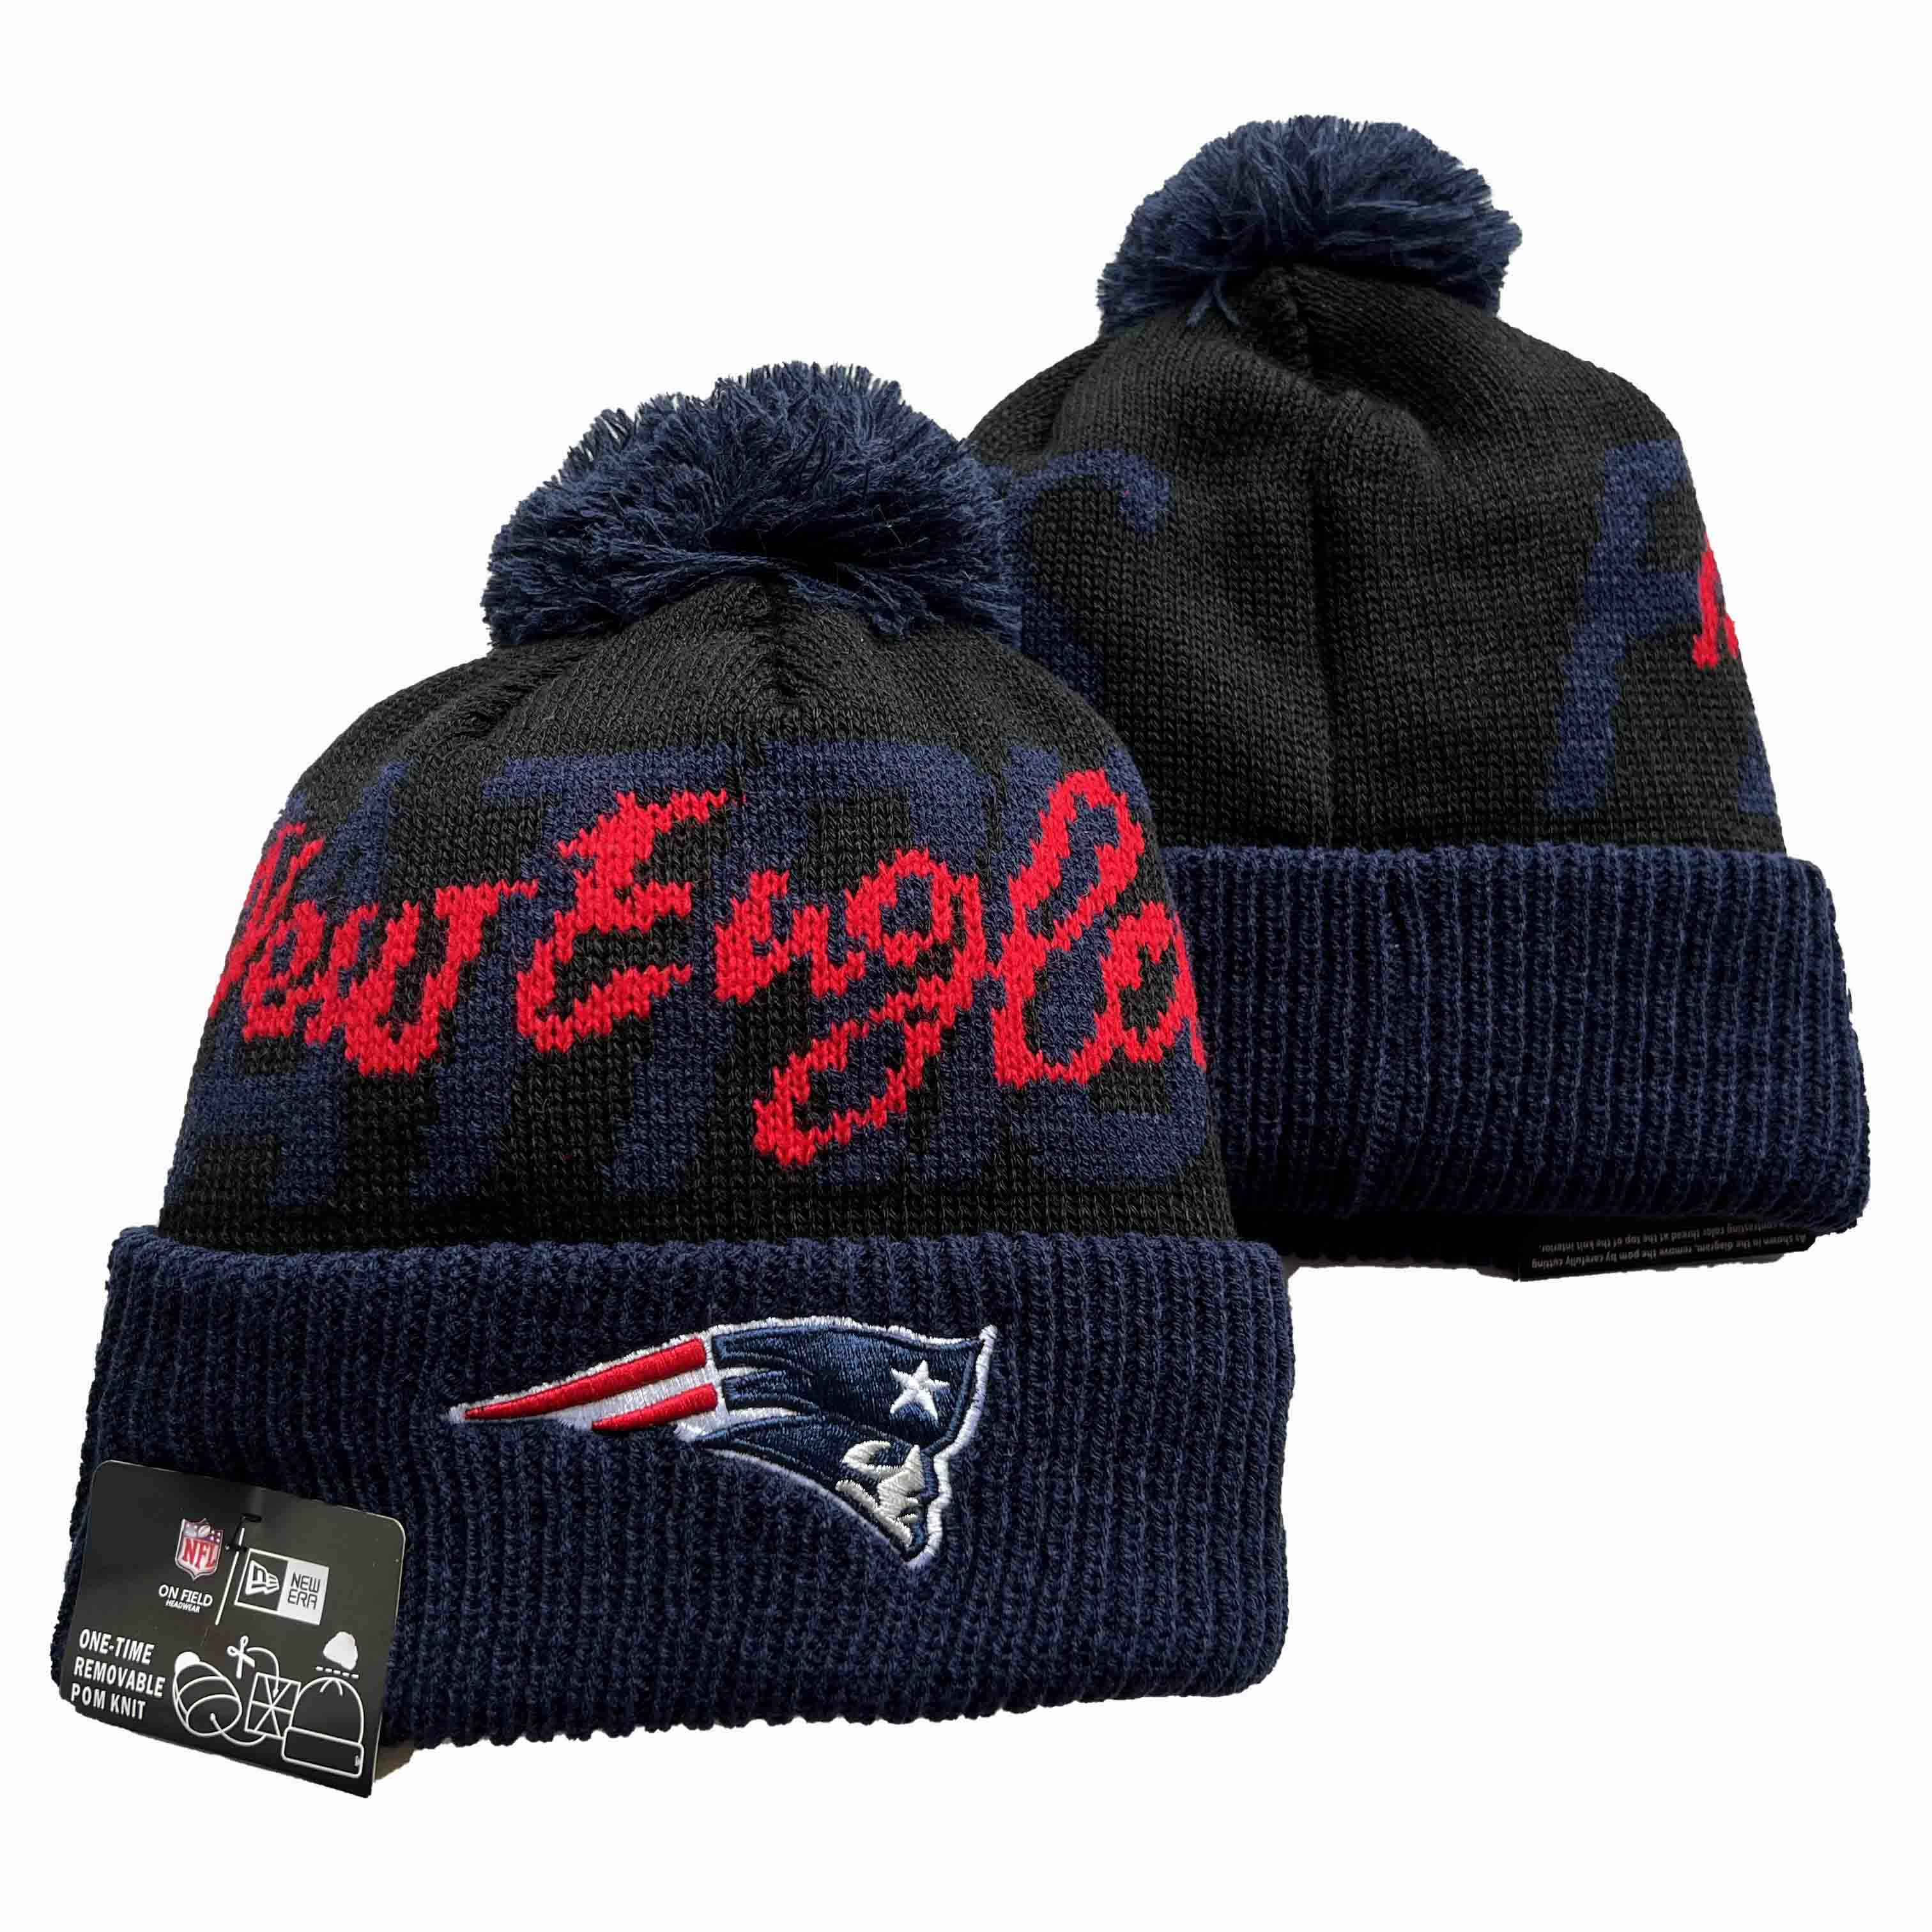 NFL New England Patriots Beanies Knit Hats-YD1245